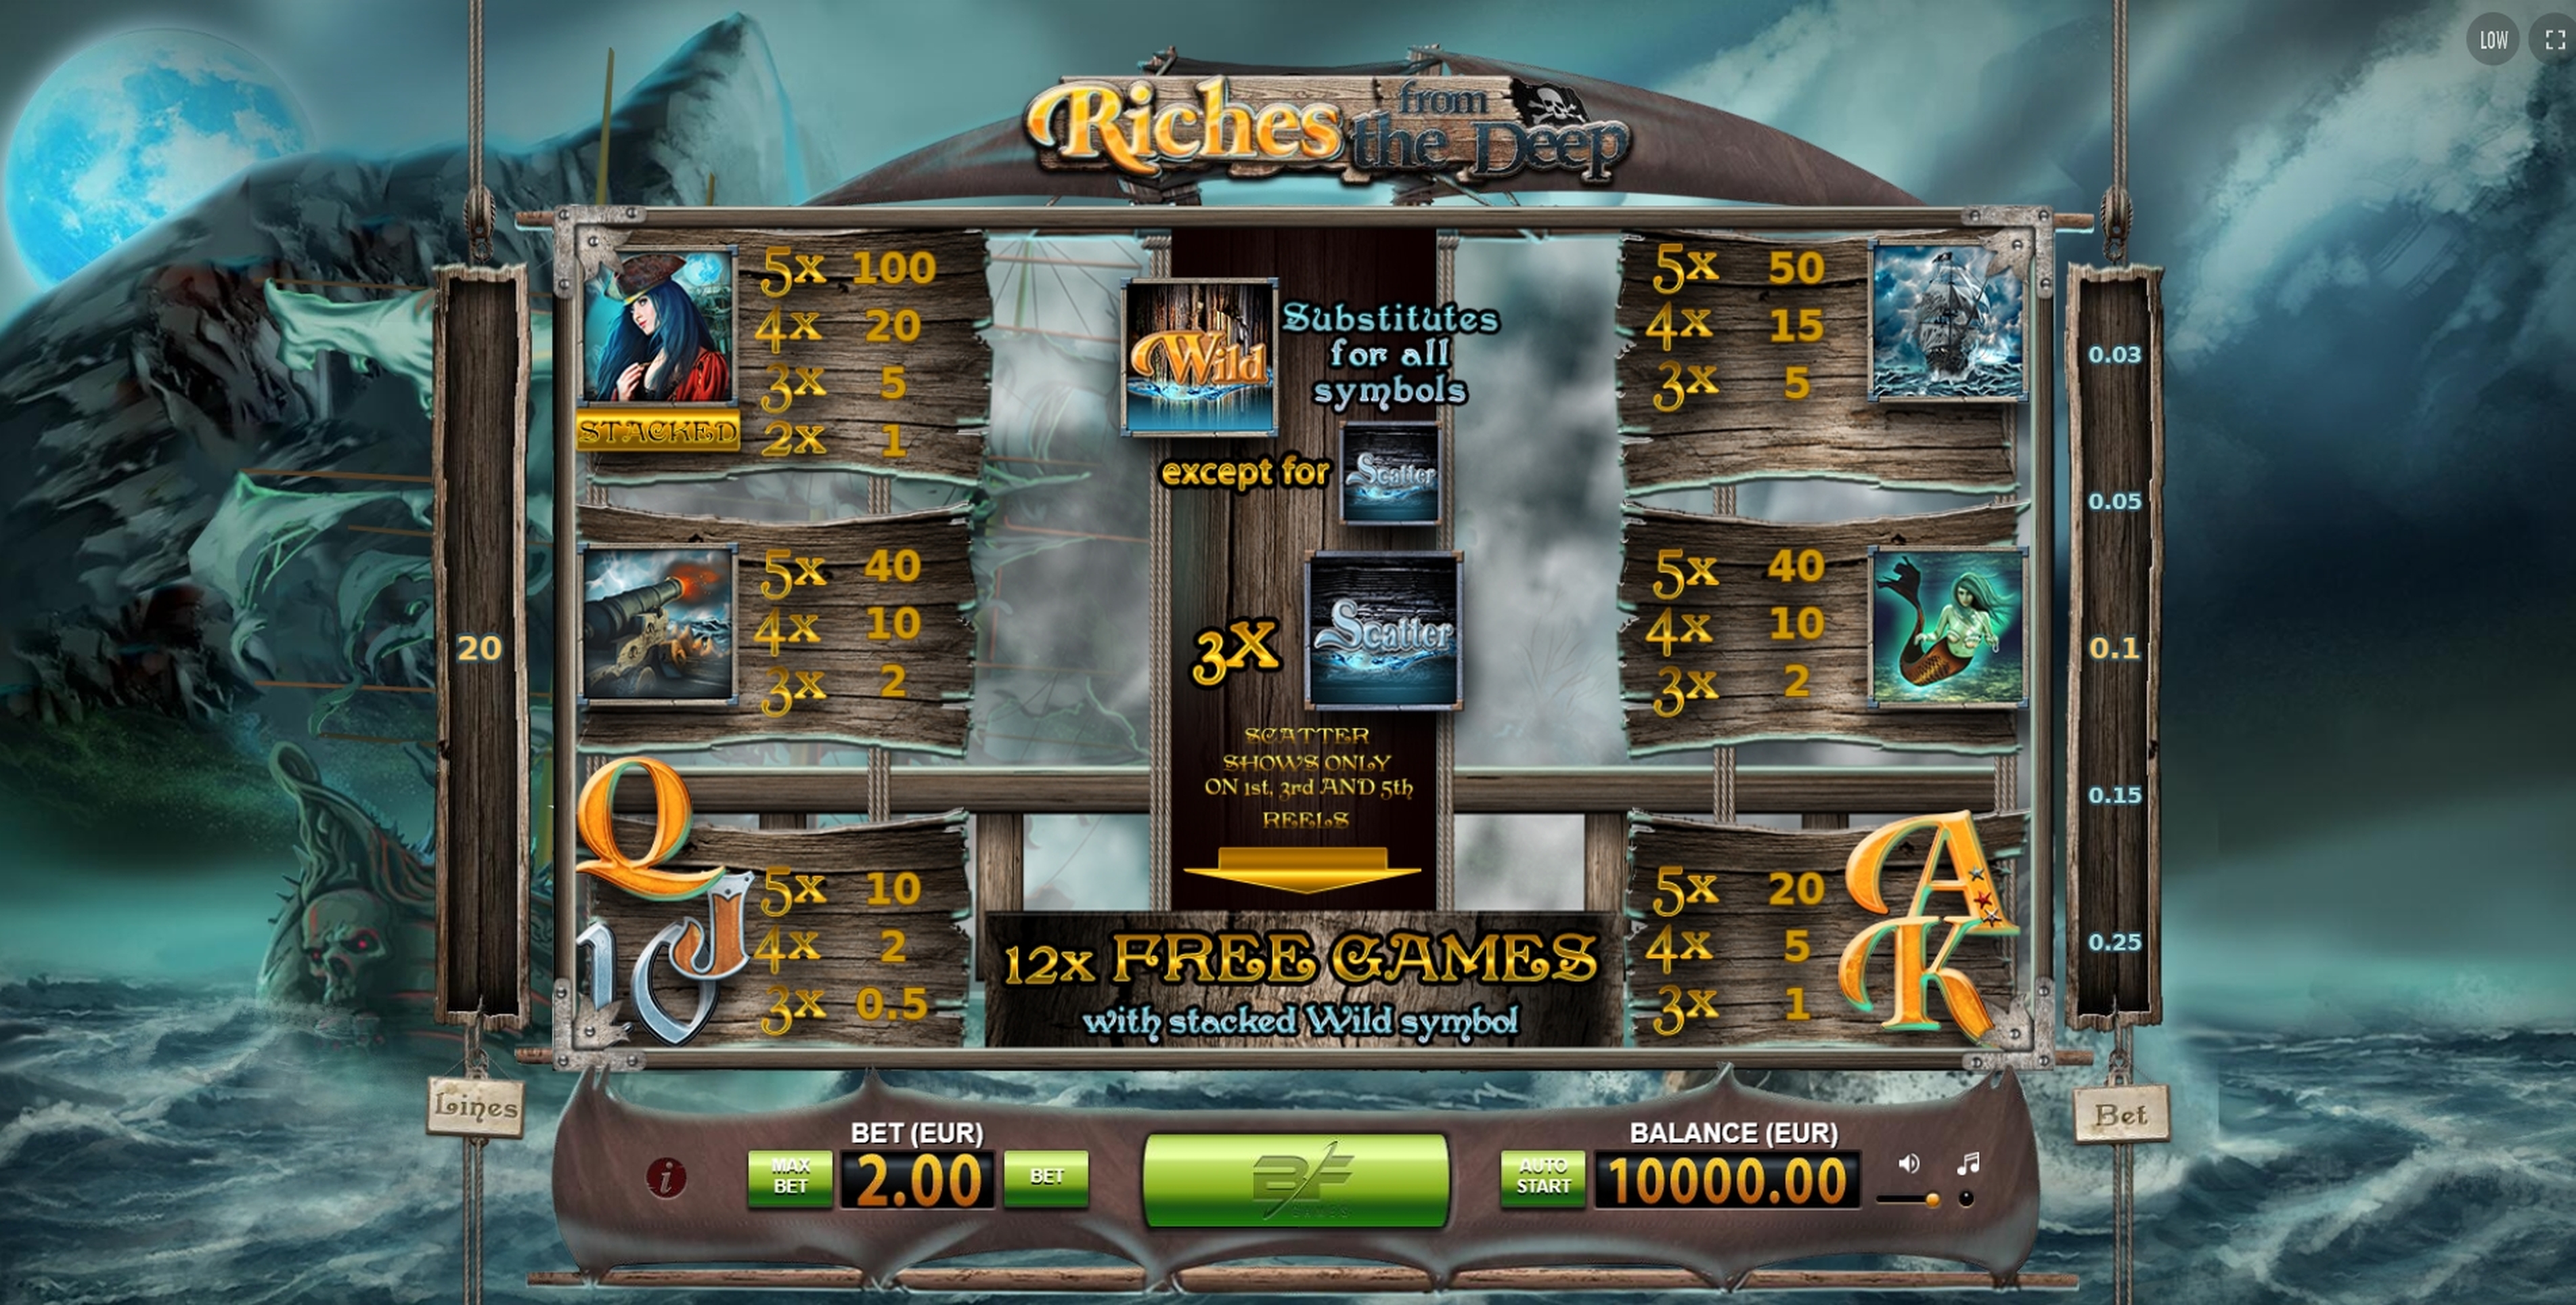 Info of Riches from the Deep Slot Game by BF Games